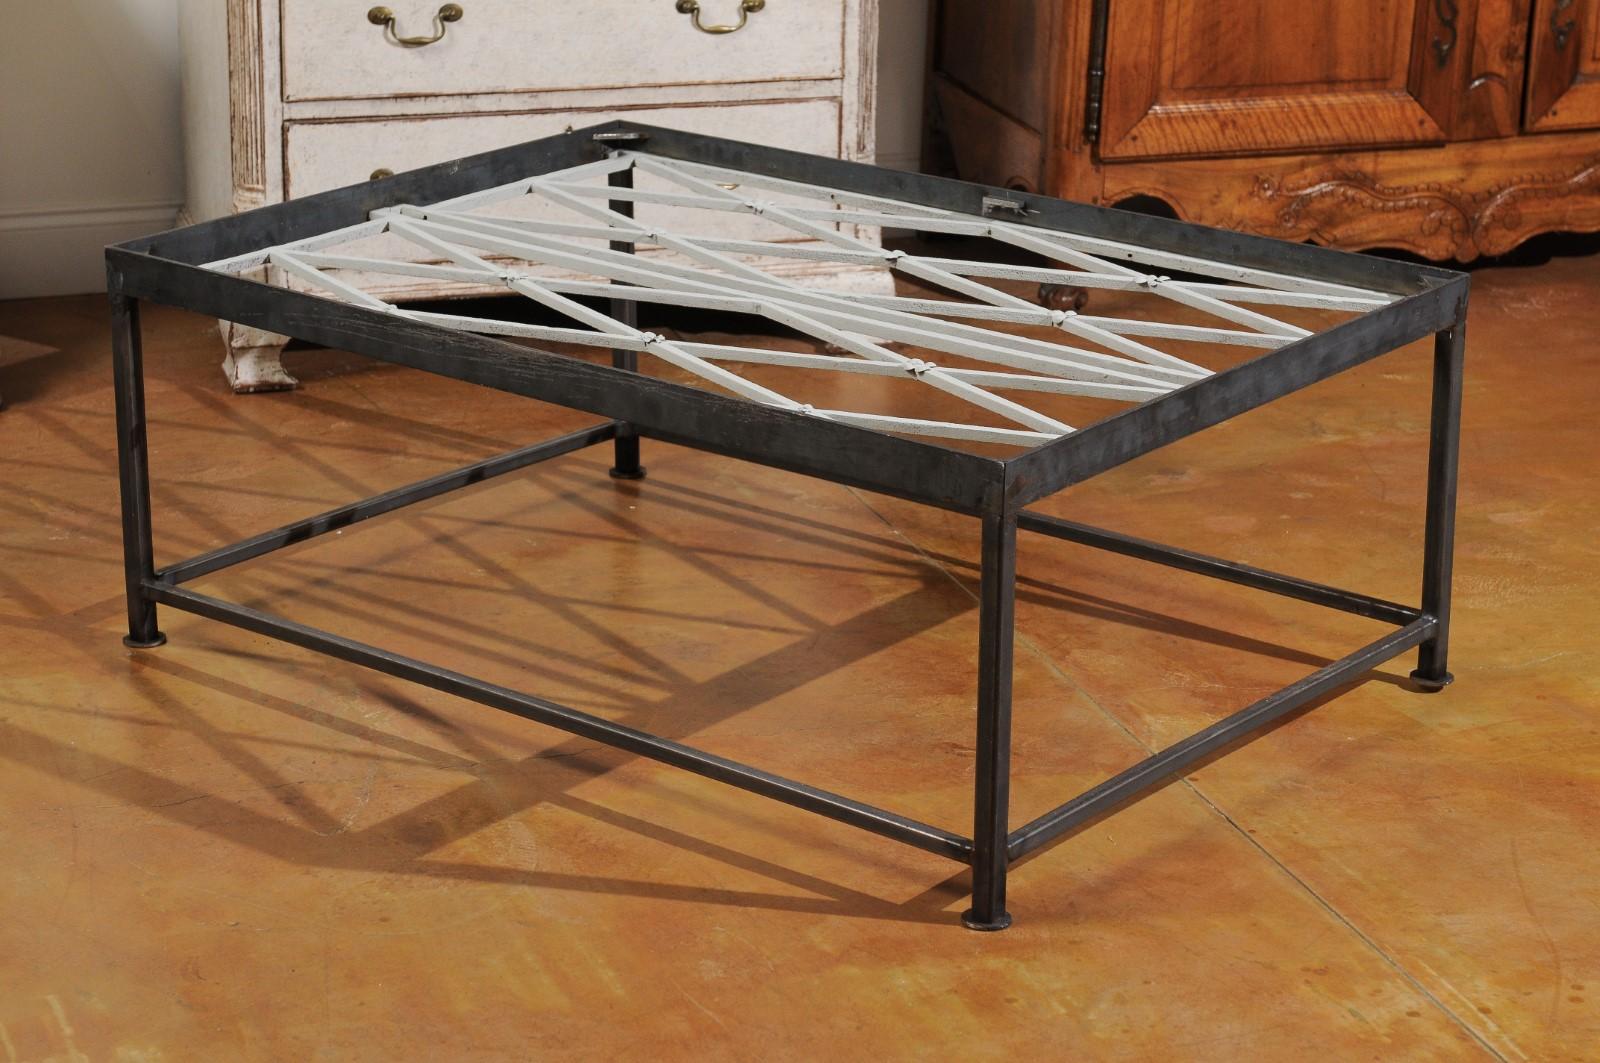 French Contemporary Coffee Table Made from 18th Century Cast Iron Railings 2